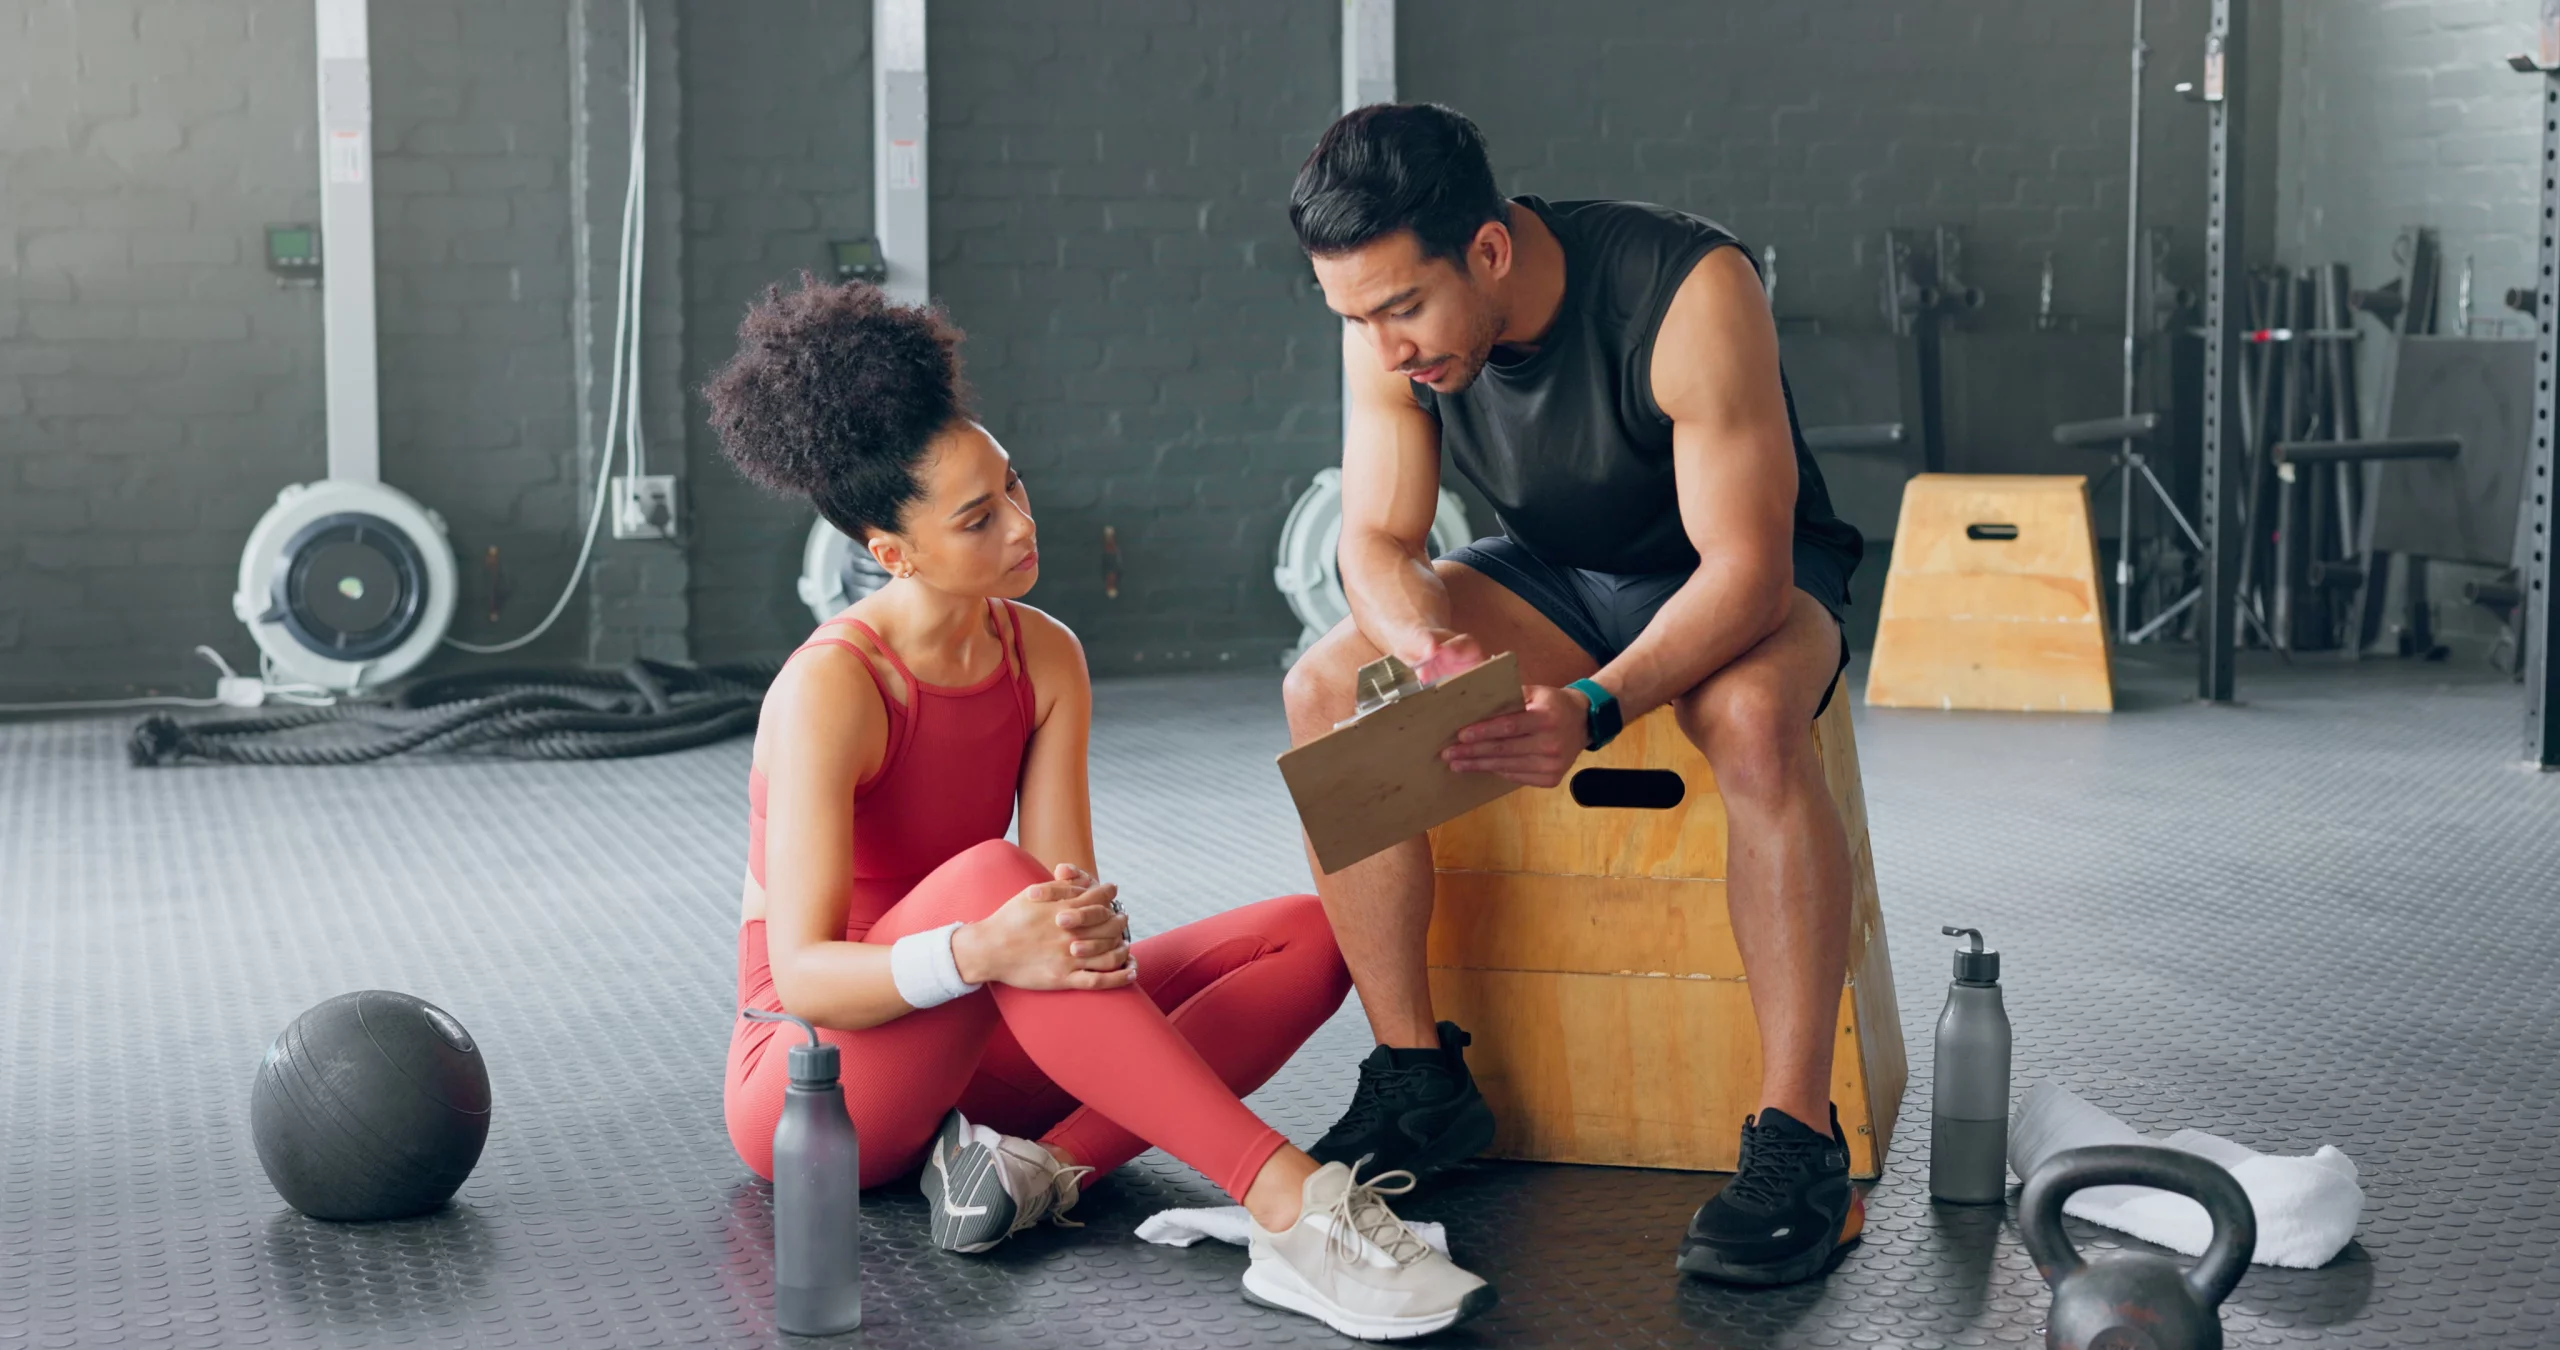 Two trainers review resources in a gym.